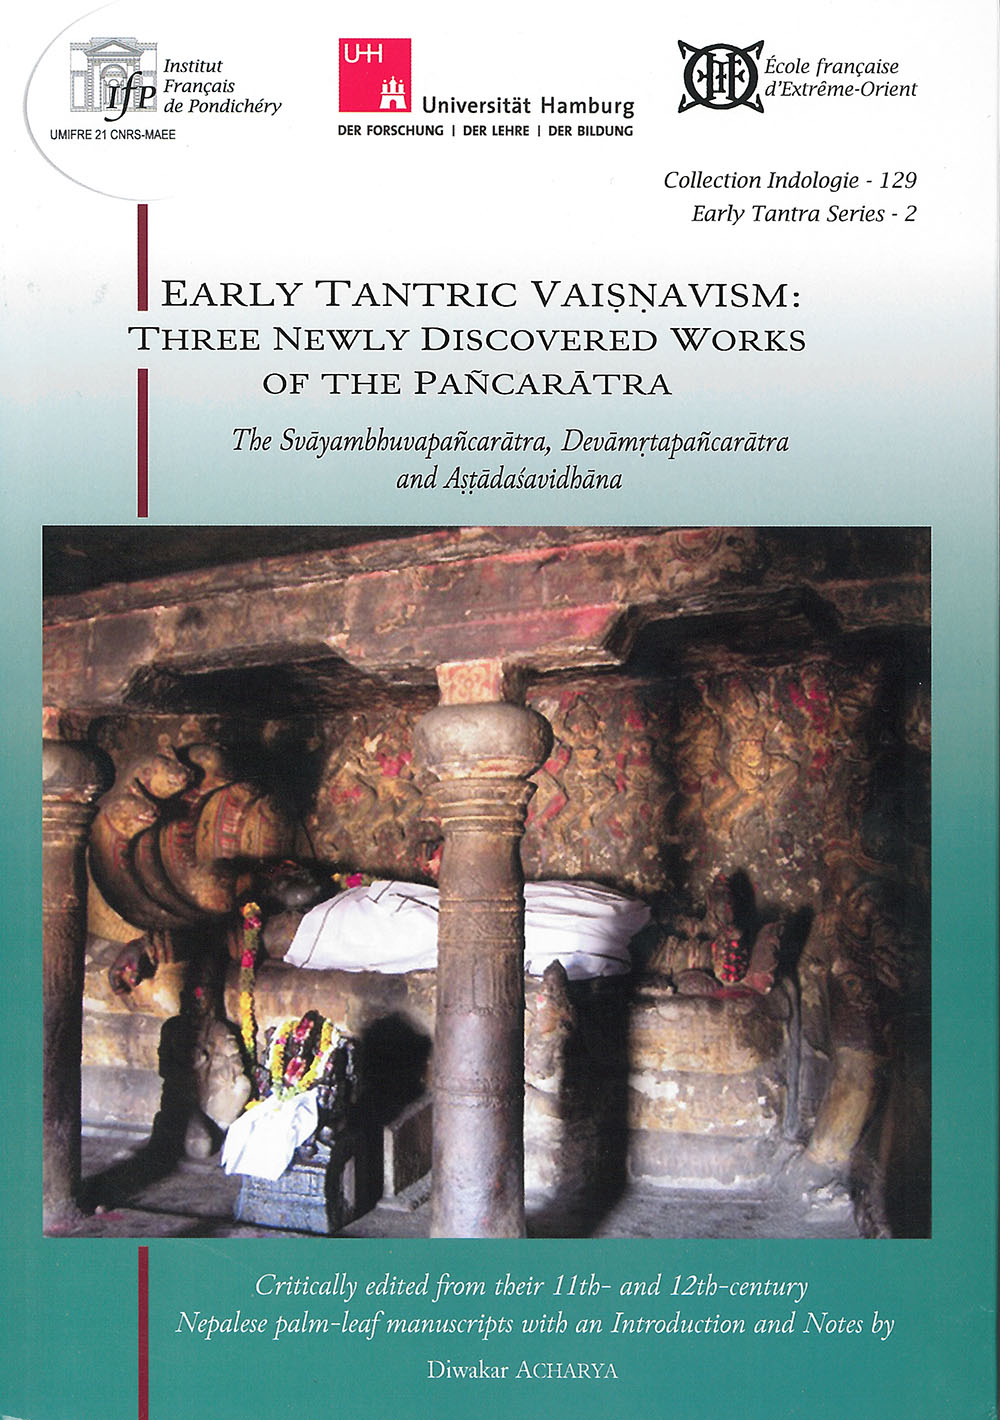 Early Tantric Vaisnavism: Three Newly Discovered Works of the Pancaratra